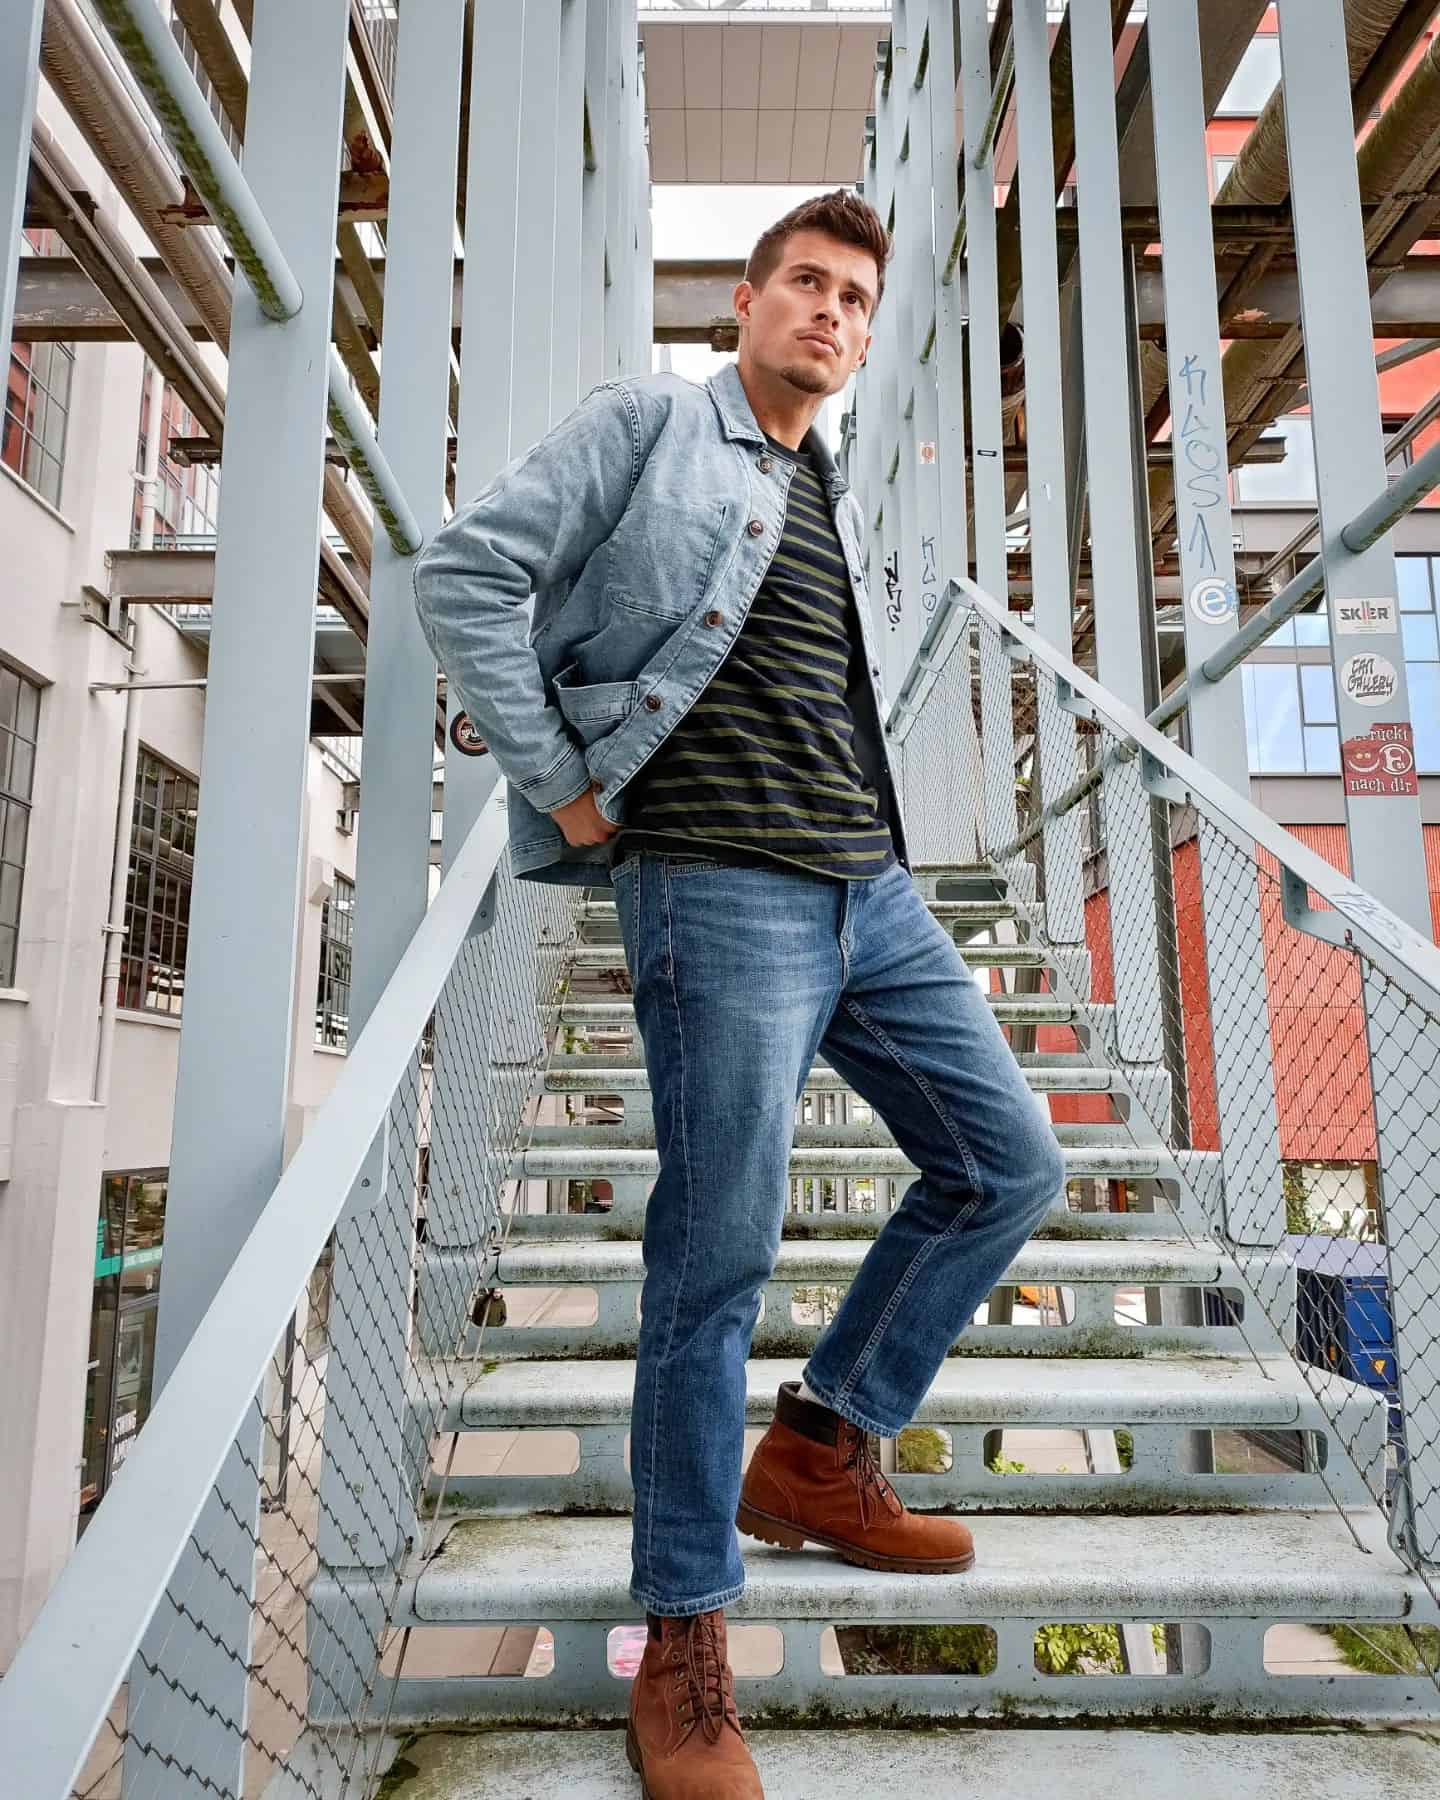 man standing on a stairwell wearing a denim jacket, dark shirt, bootcut jeans, and brown boots